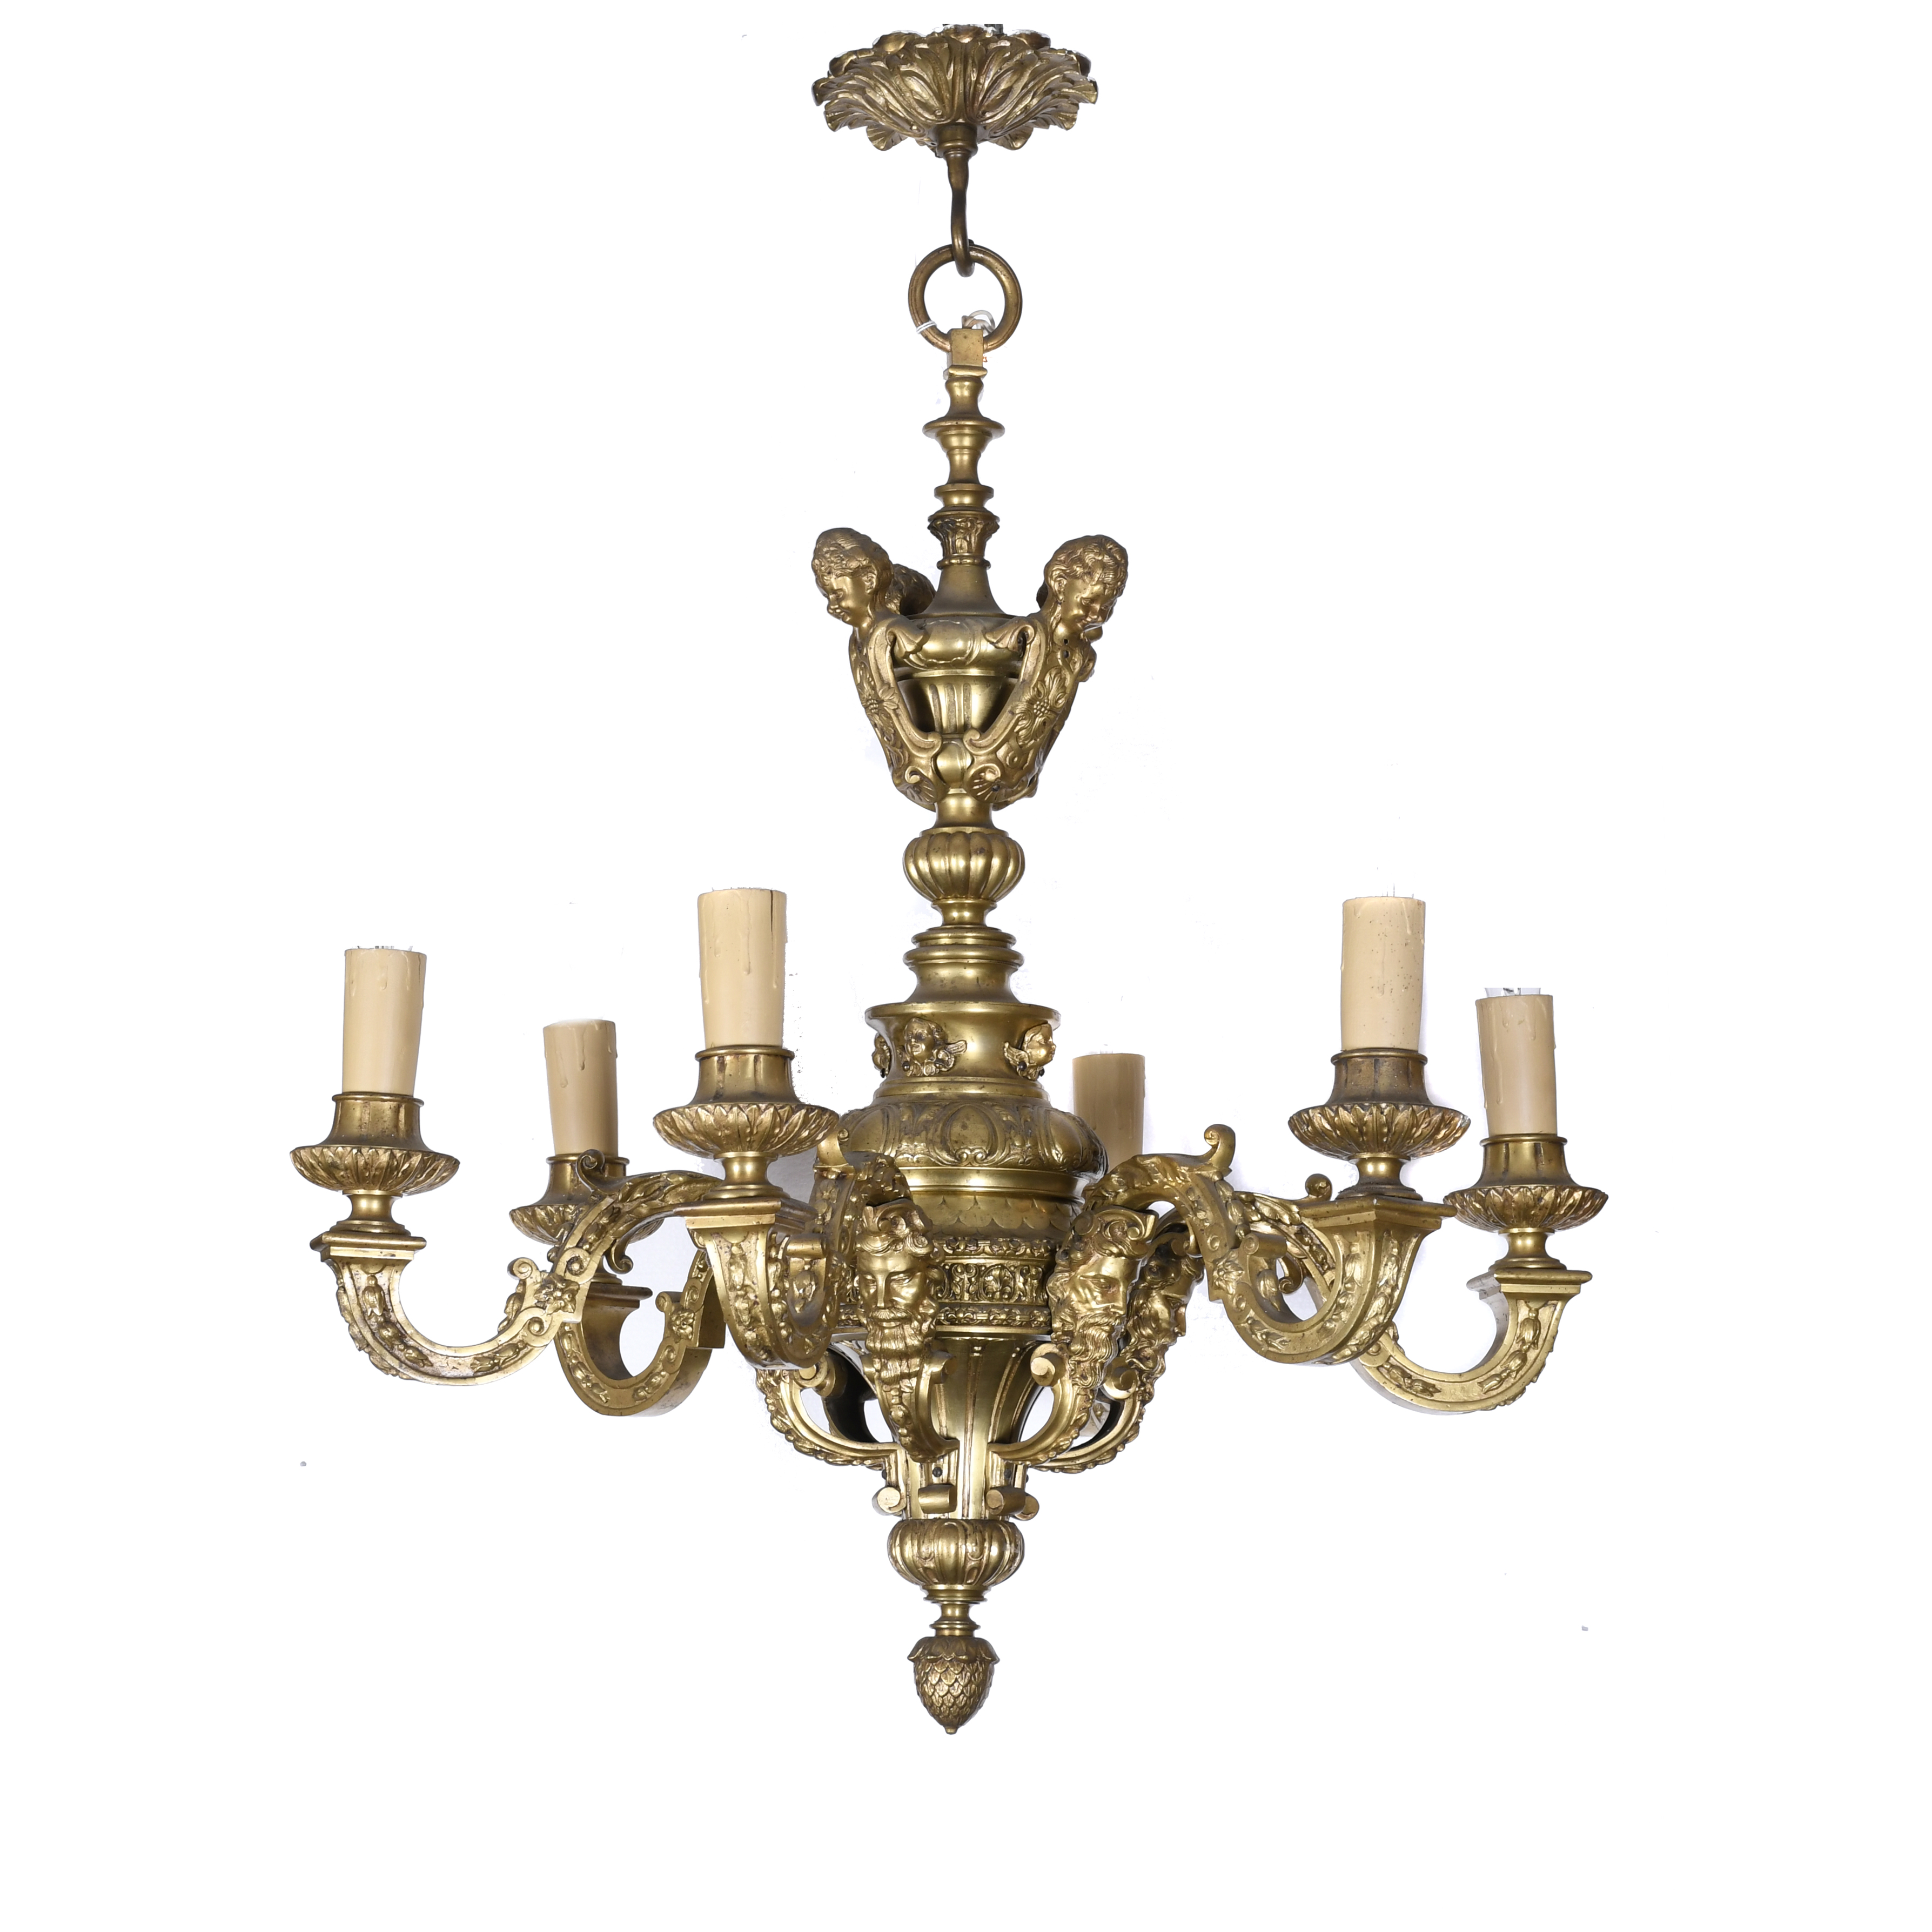 SPANISH CEILING LAMP, EARLY 20TH CENTURY.